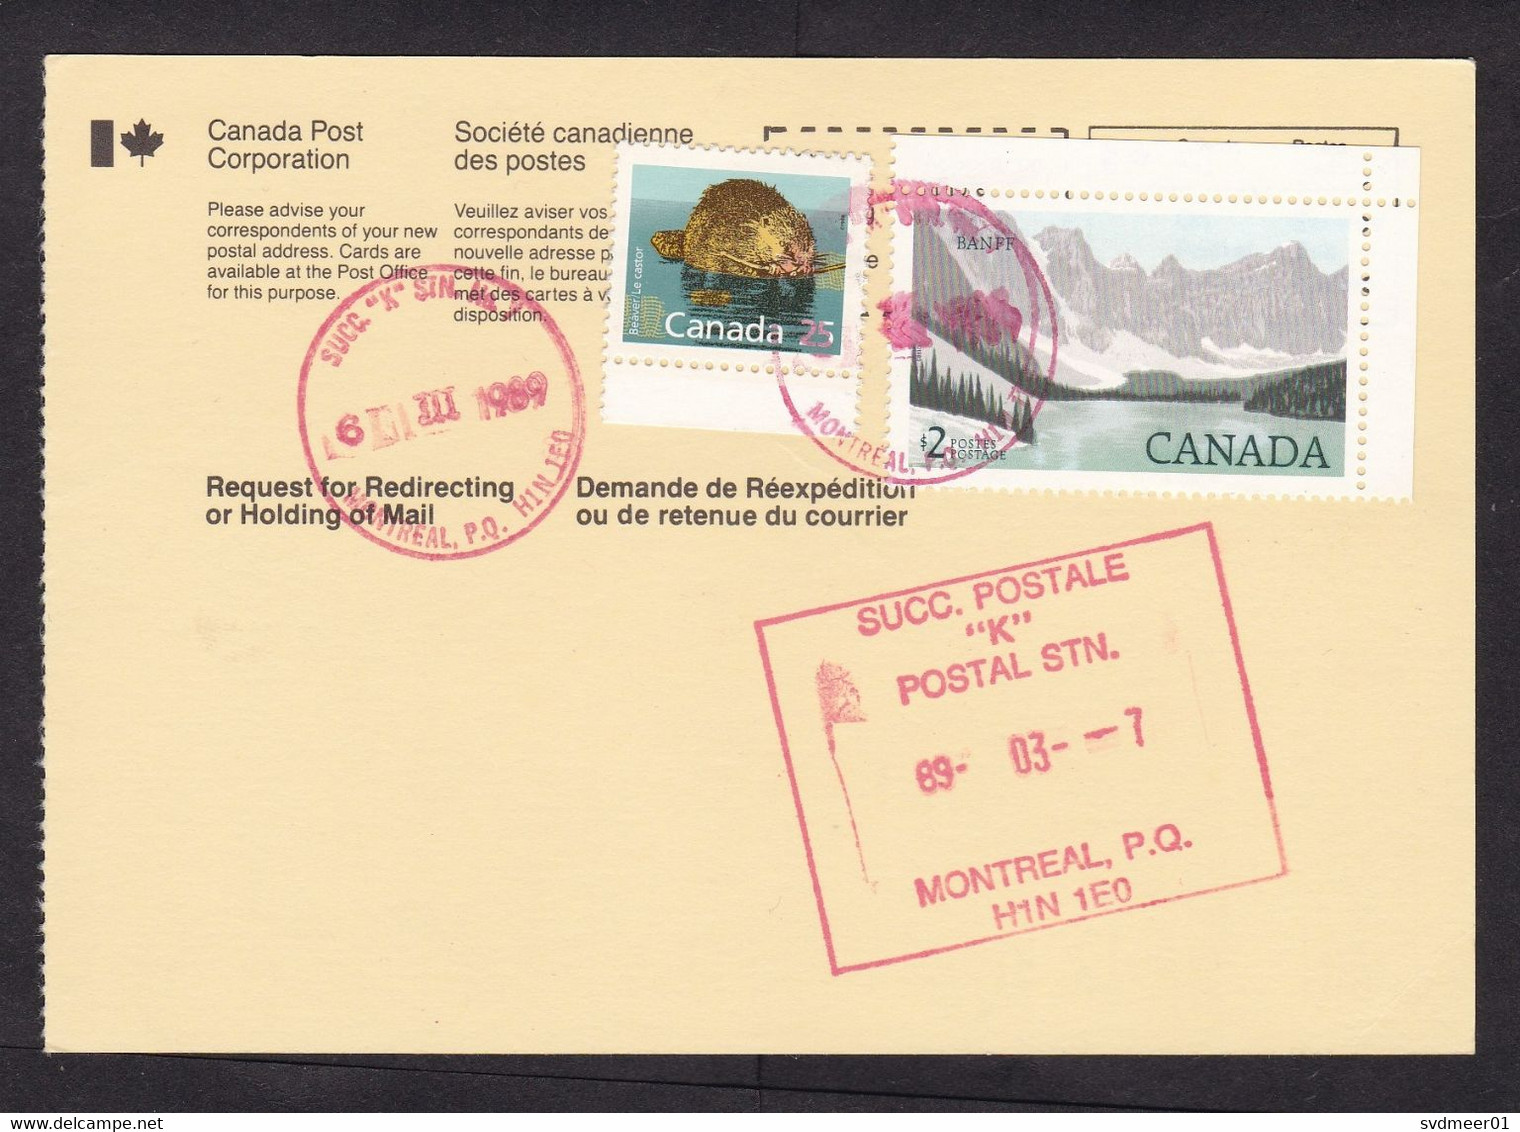 Canada: Official Postcard, 1989, 2 Stamps, Request Redirecting Or Holding Mail, Box Cancel, Uncommon (traces Of Use) - Covers & Documents